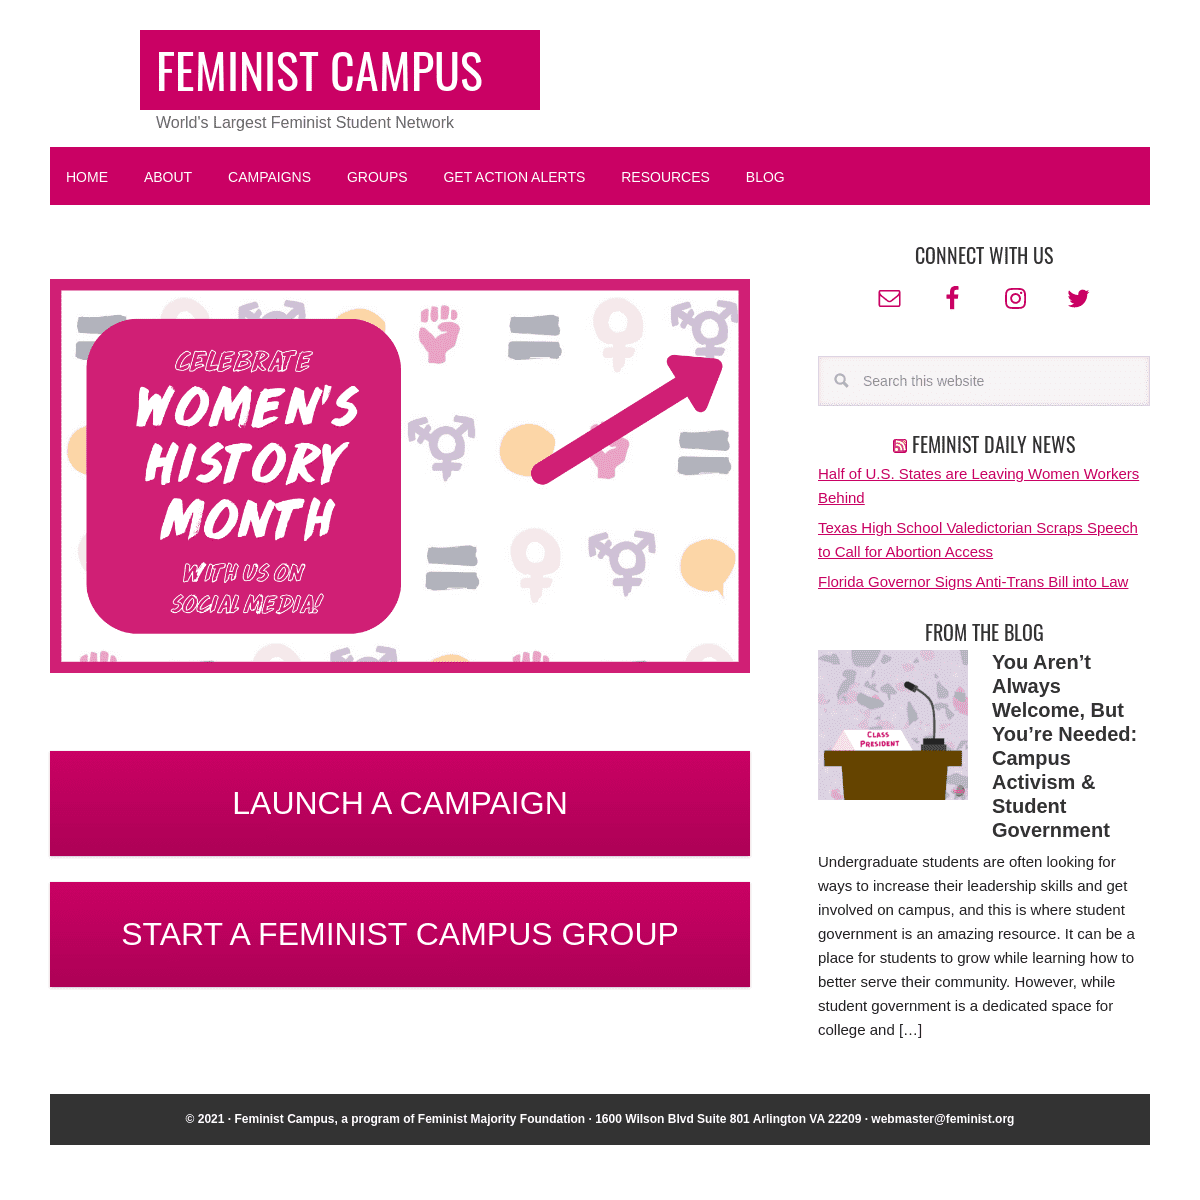 A complete backup of https://feministcampus.org